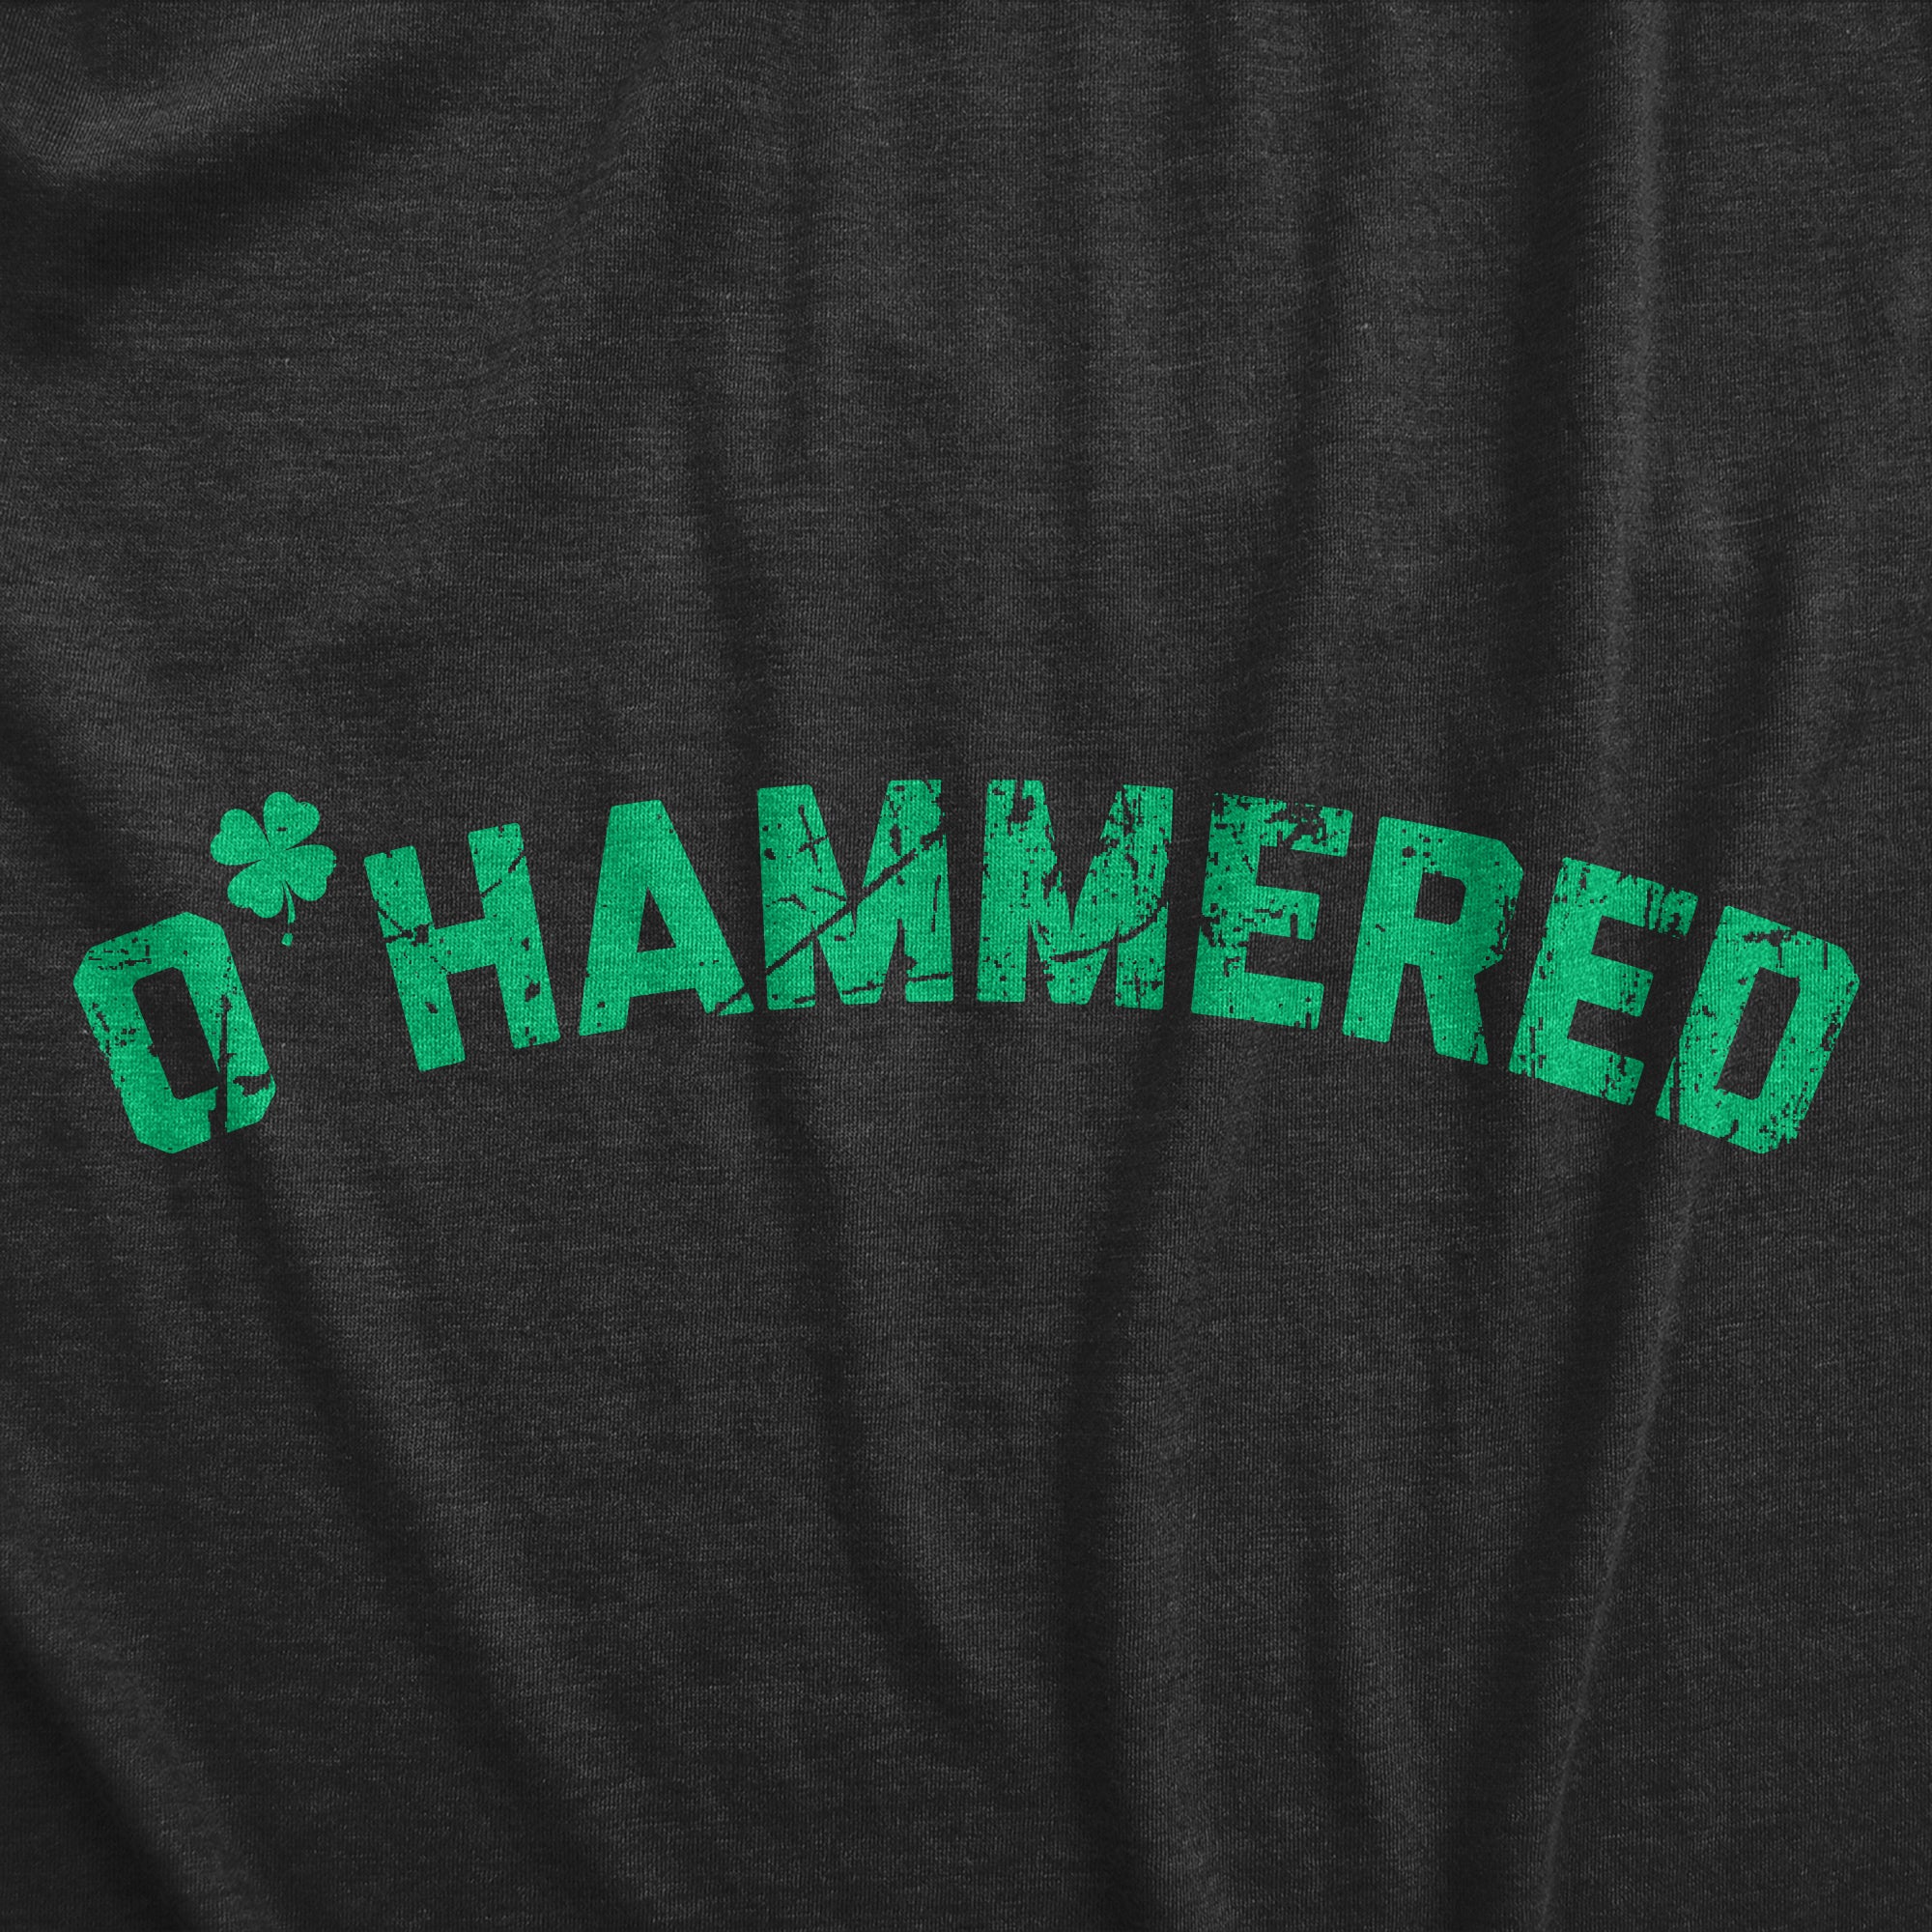 Funny Heather Black - HAMMERED OHammered Mens T Shirt Nerdy Saint Patrick's Day Drinking Tee